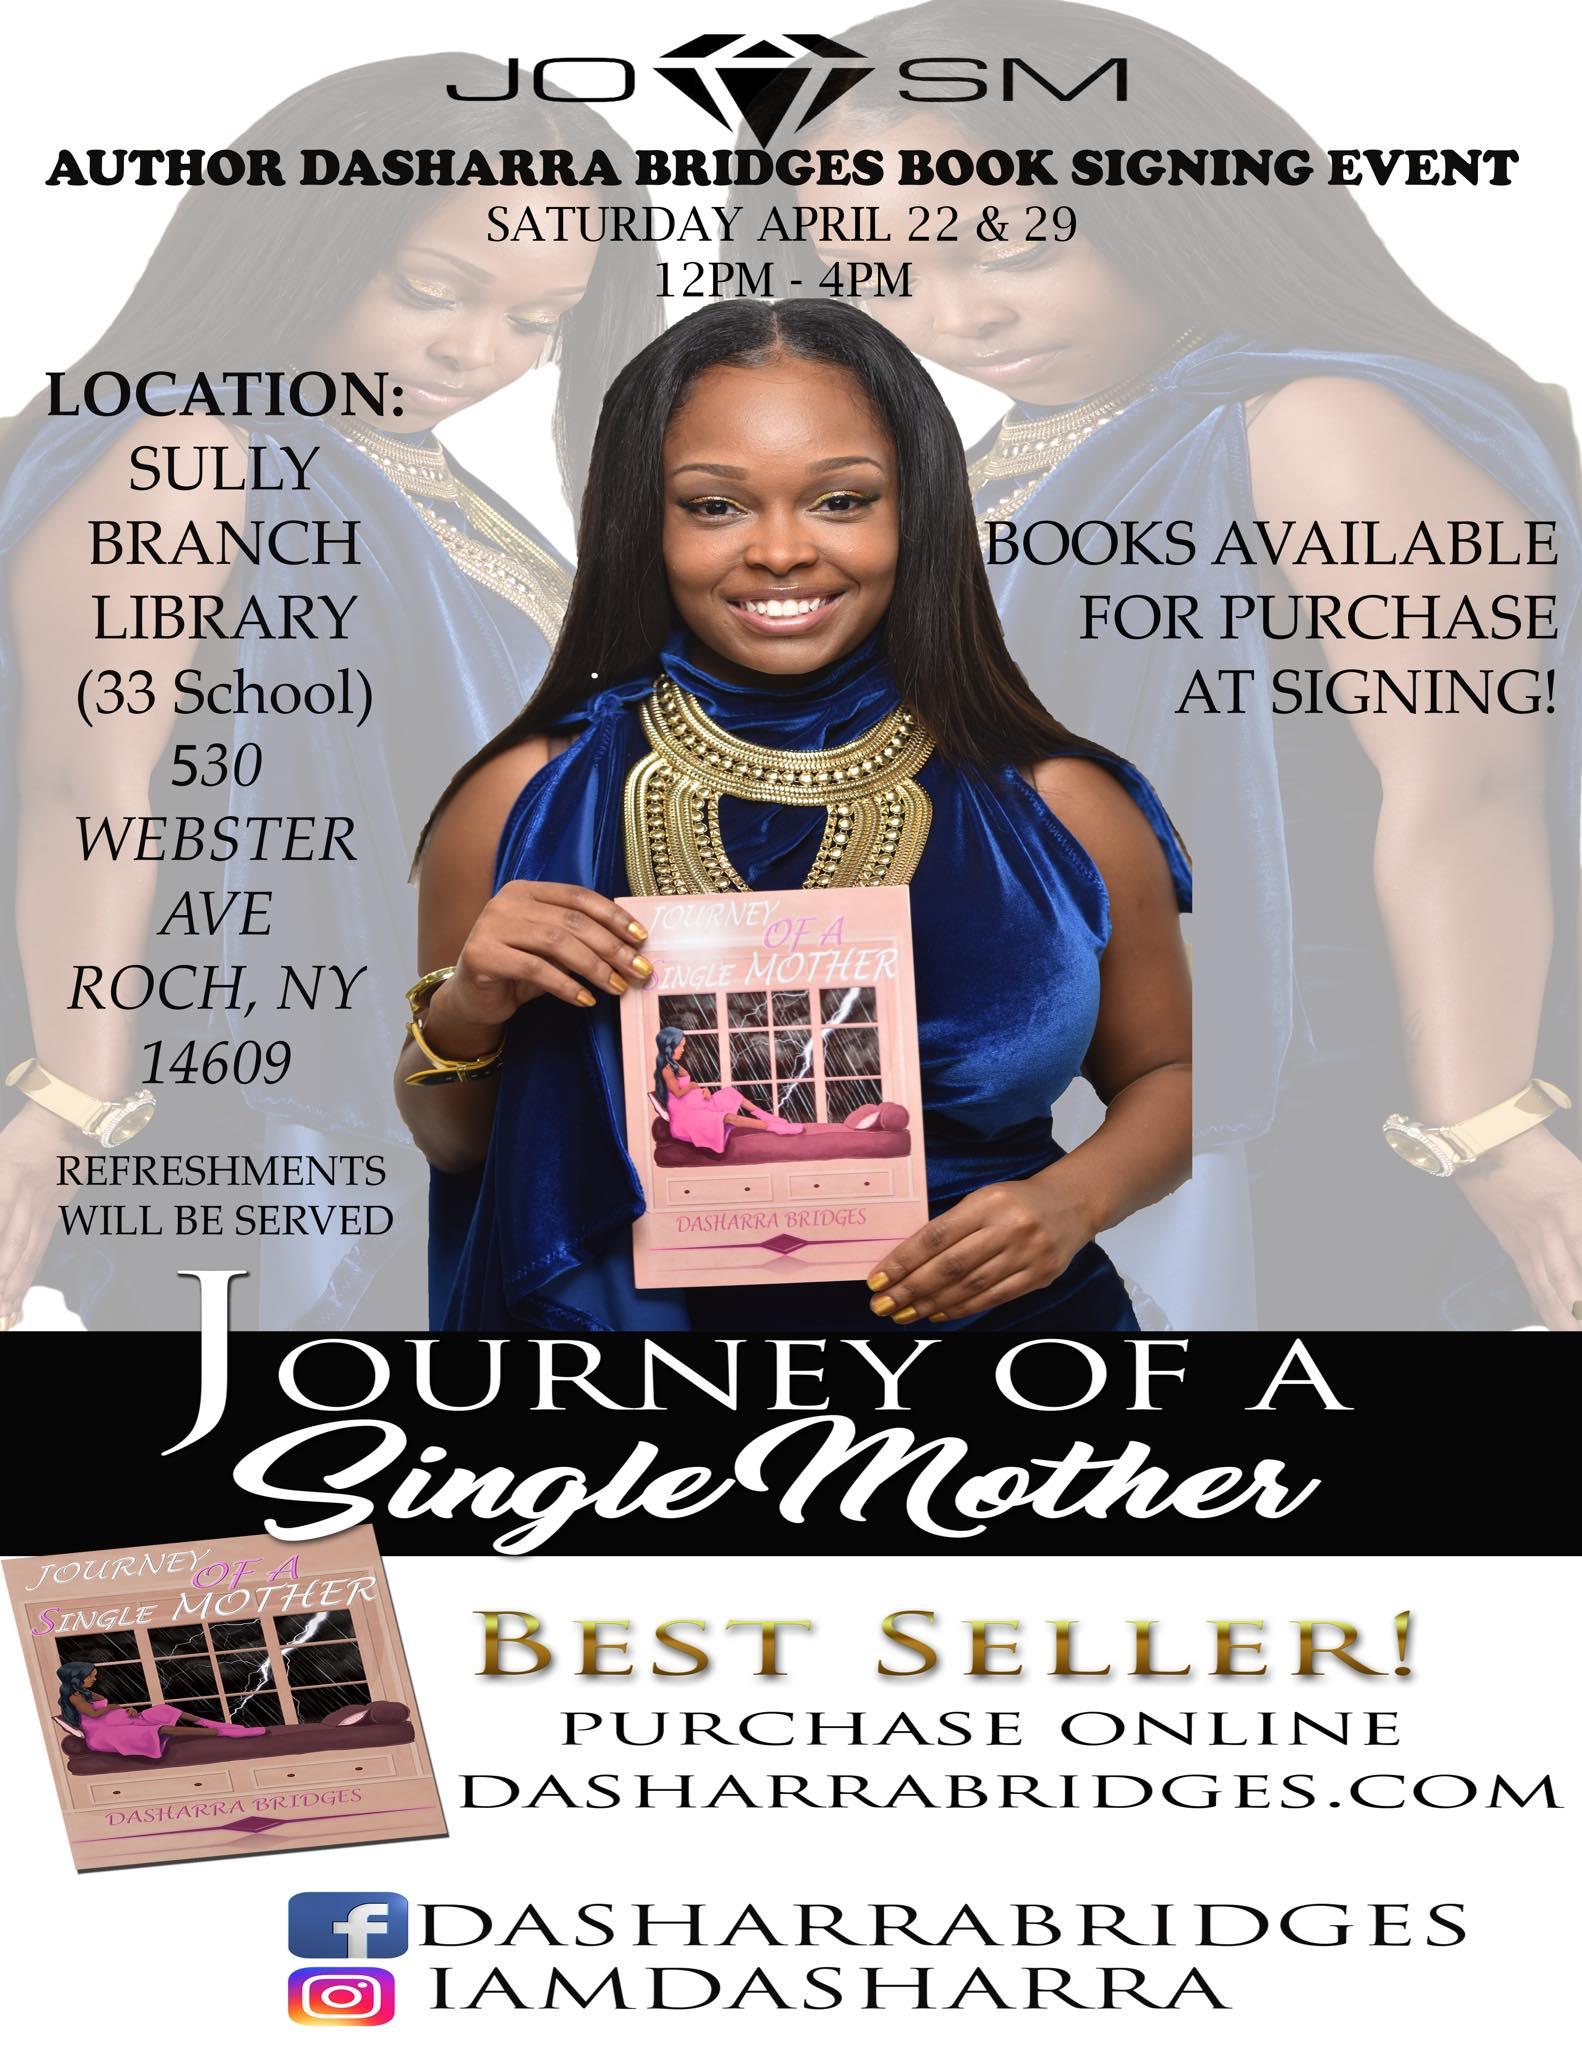 AUTHOR DASHARRA BRIDGES BOOK SIGNING FOR, JOURNEY OF A SINGLE MOTHER.